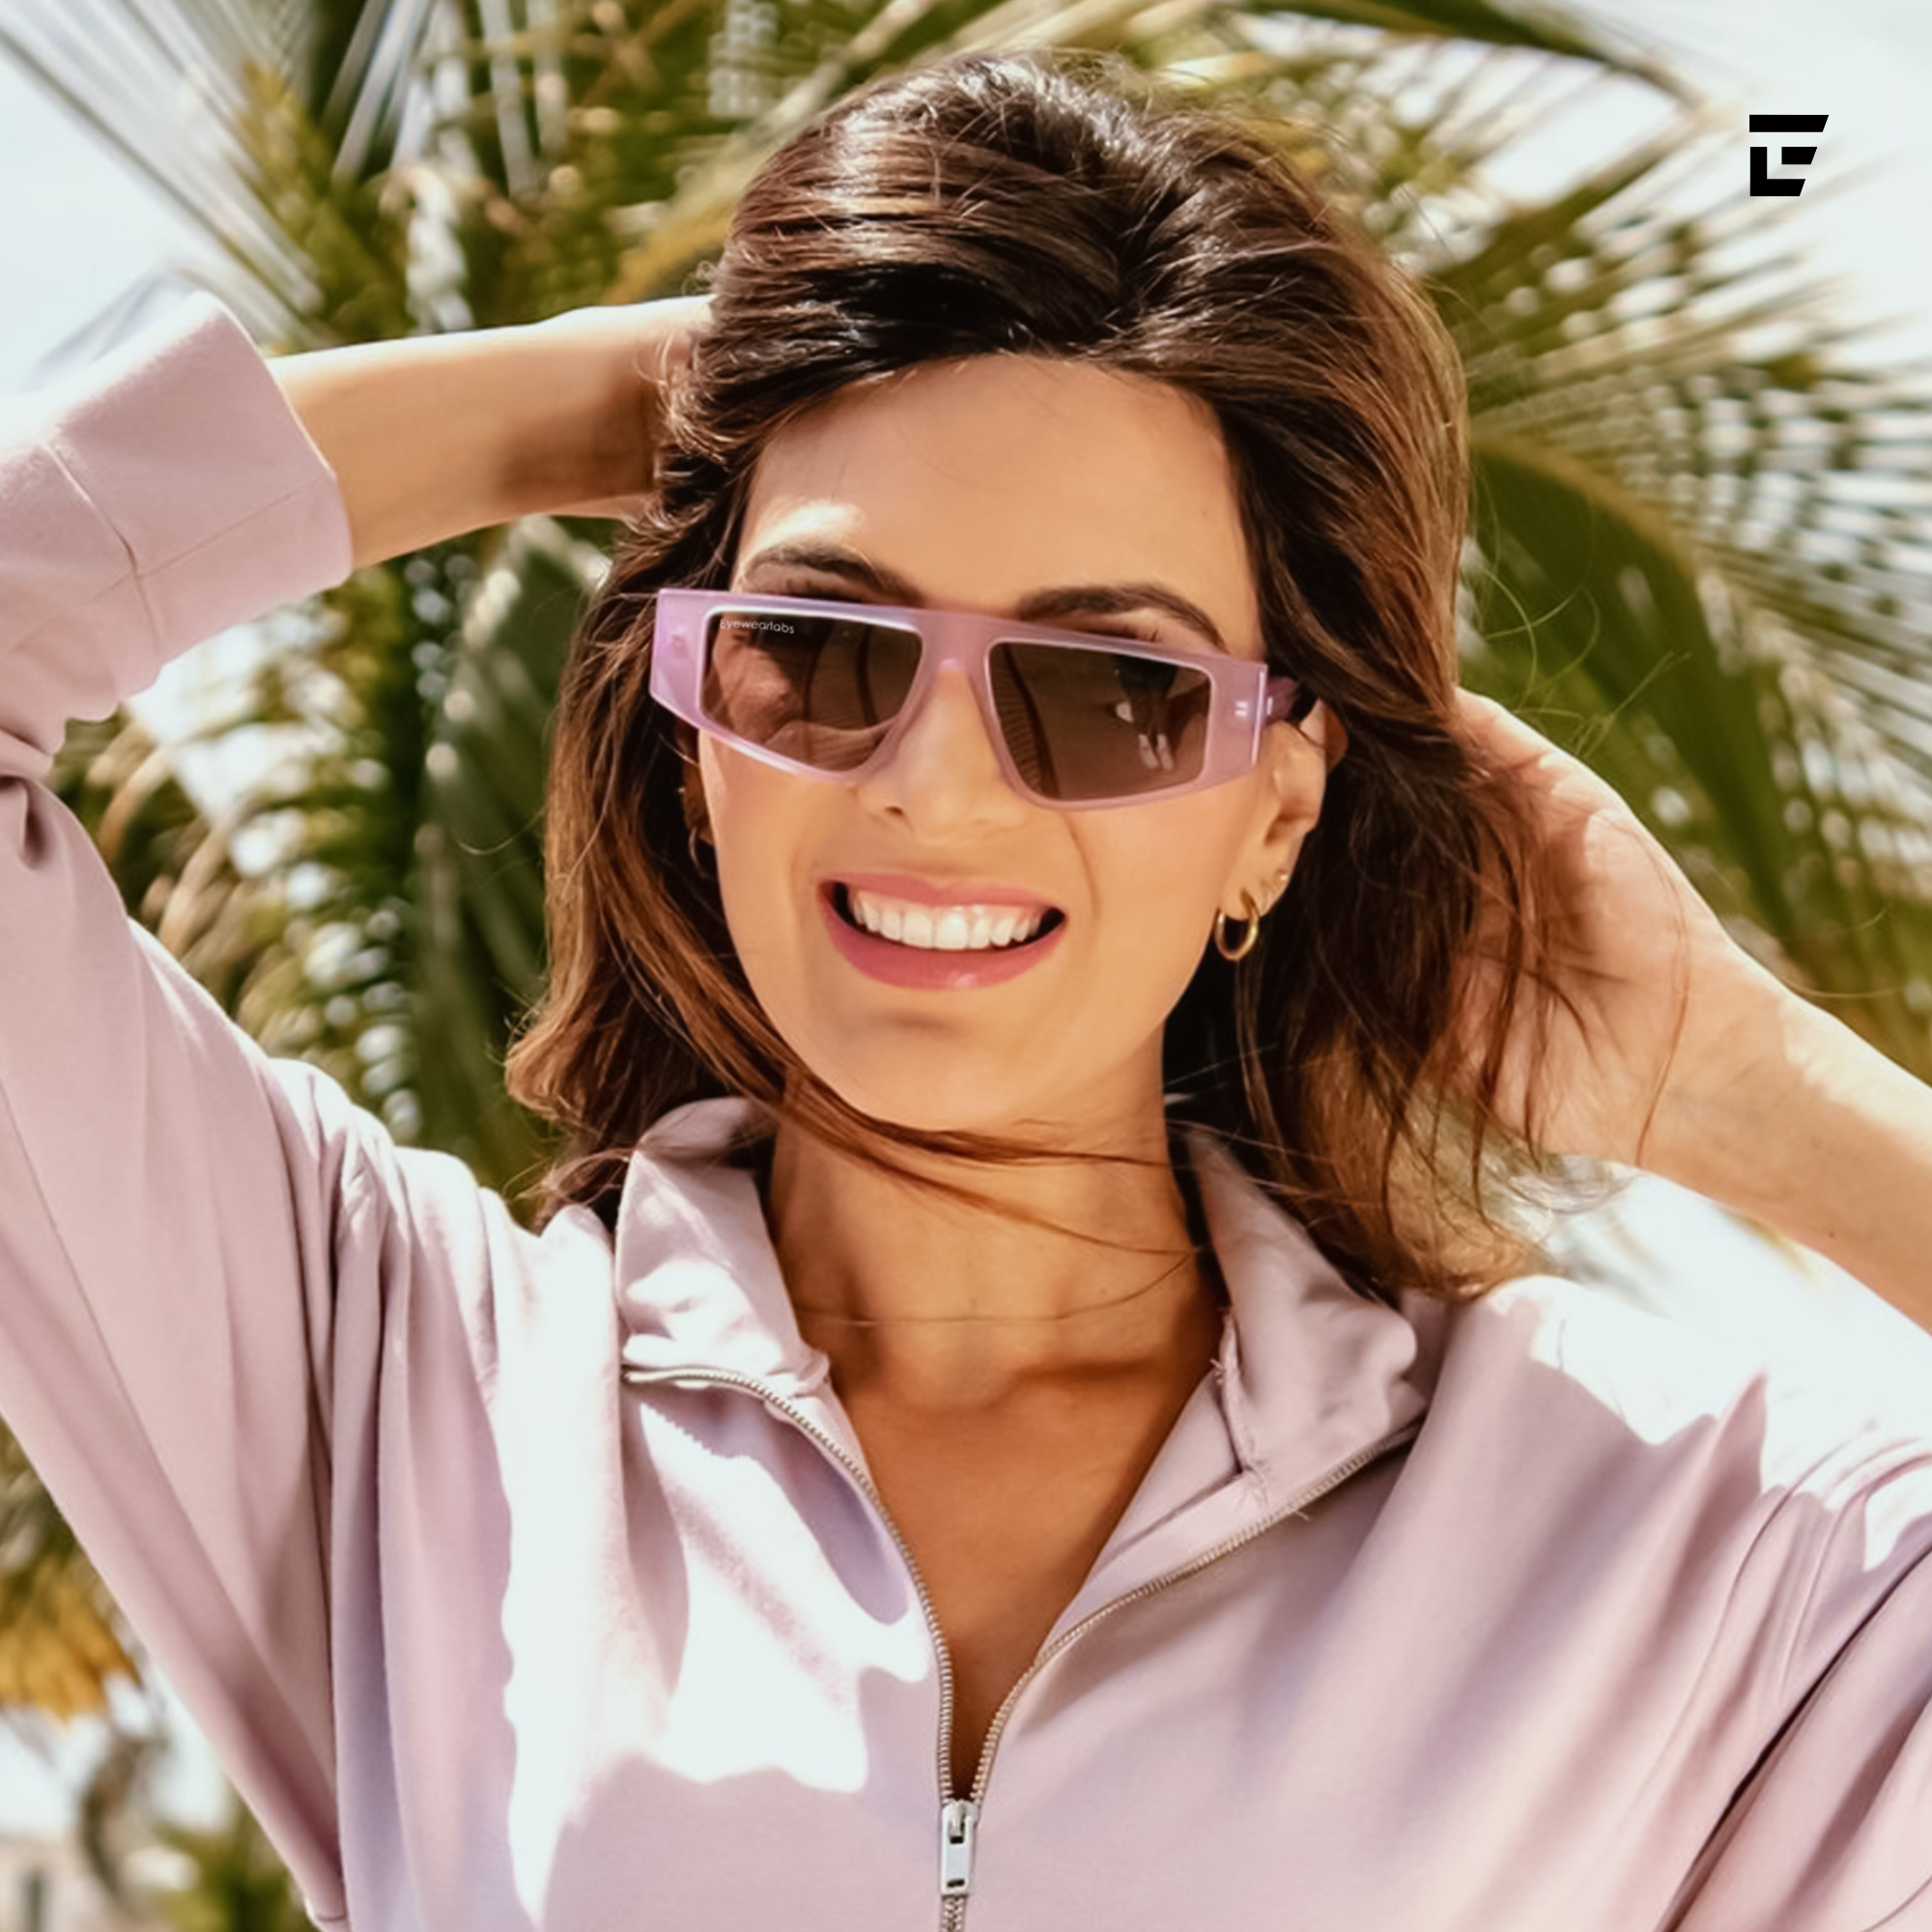 The 15 Best Sunglasses For Women, According To Fashion Editors